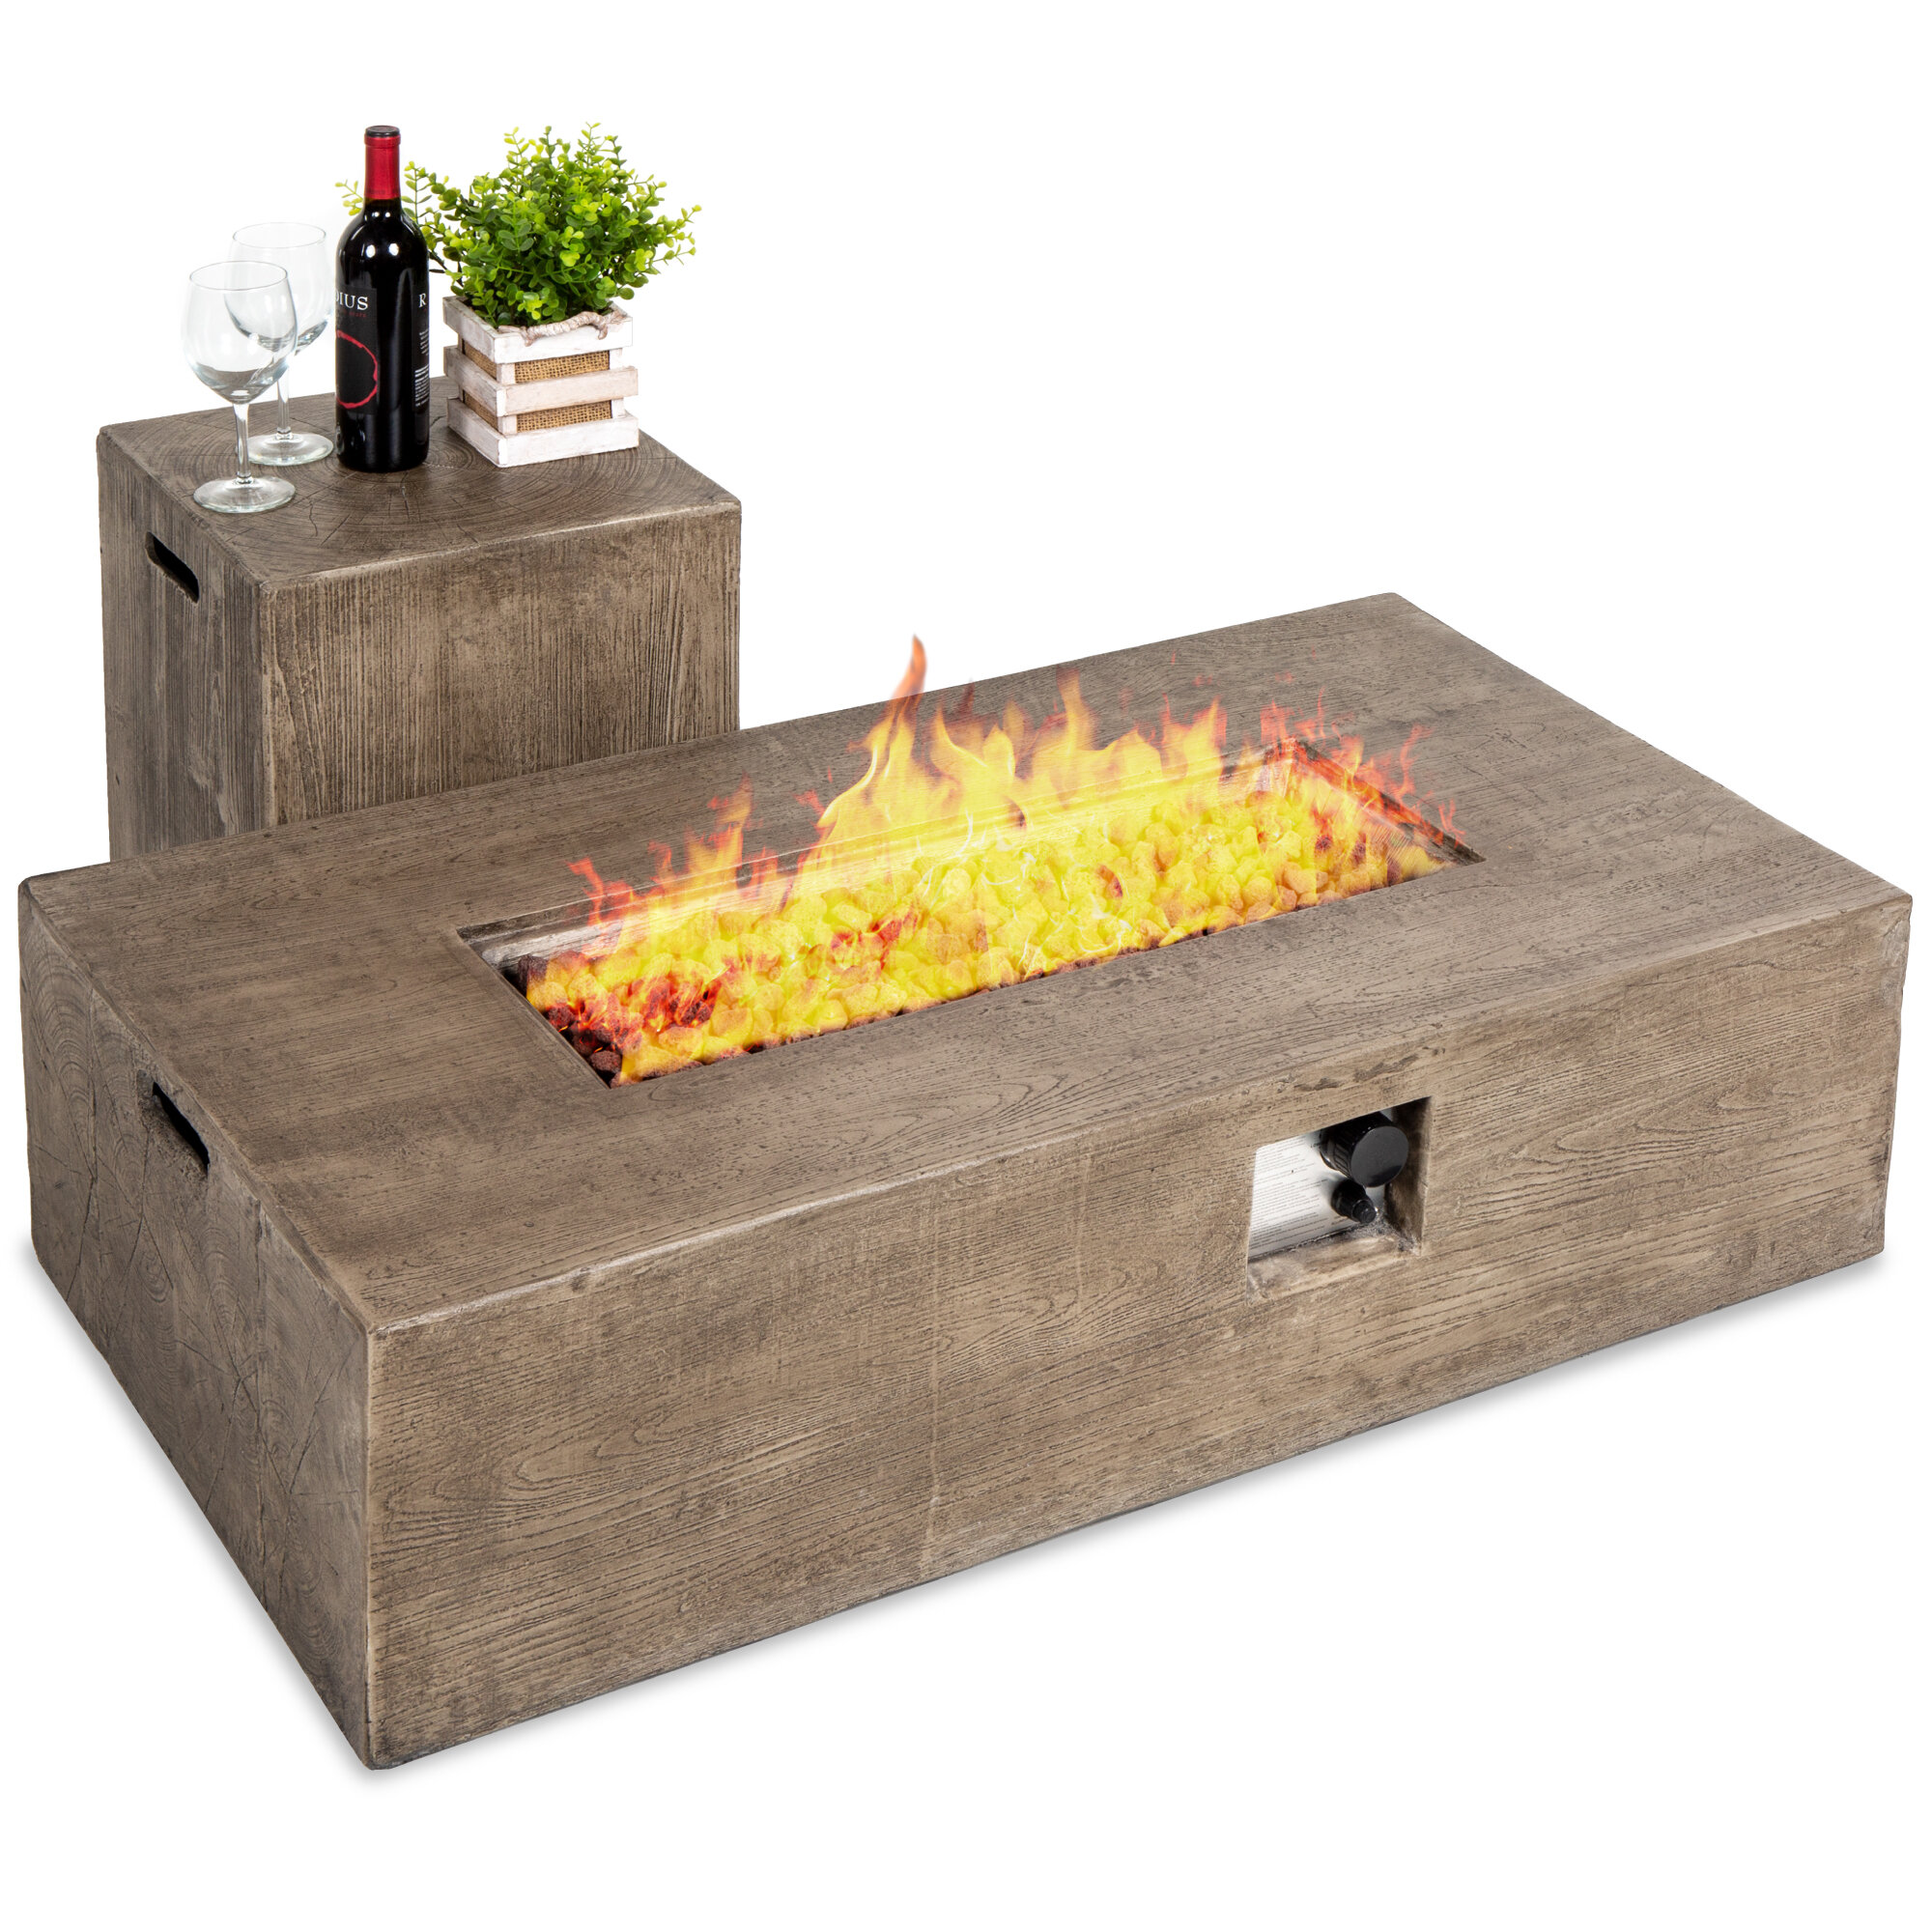 Loon Peak 48x27in 50 000 Btu Patio Propane Fire Pit Table Side Table Tank Storage W Wood Finish Pit Cover Reviews Wayfair